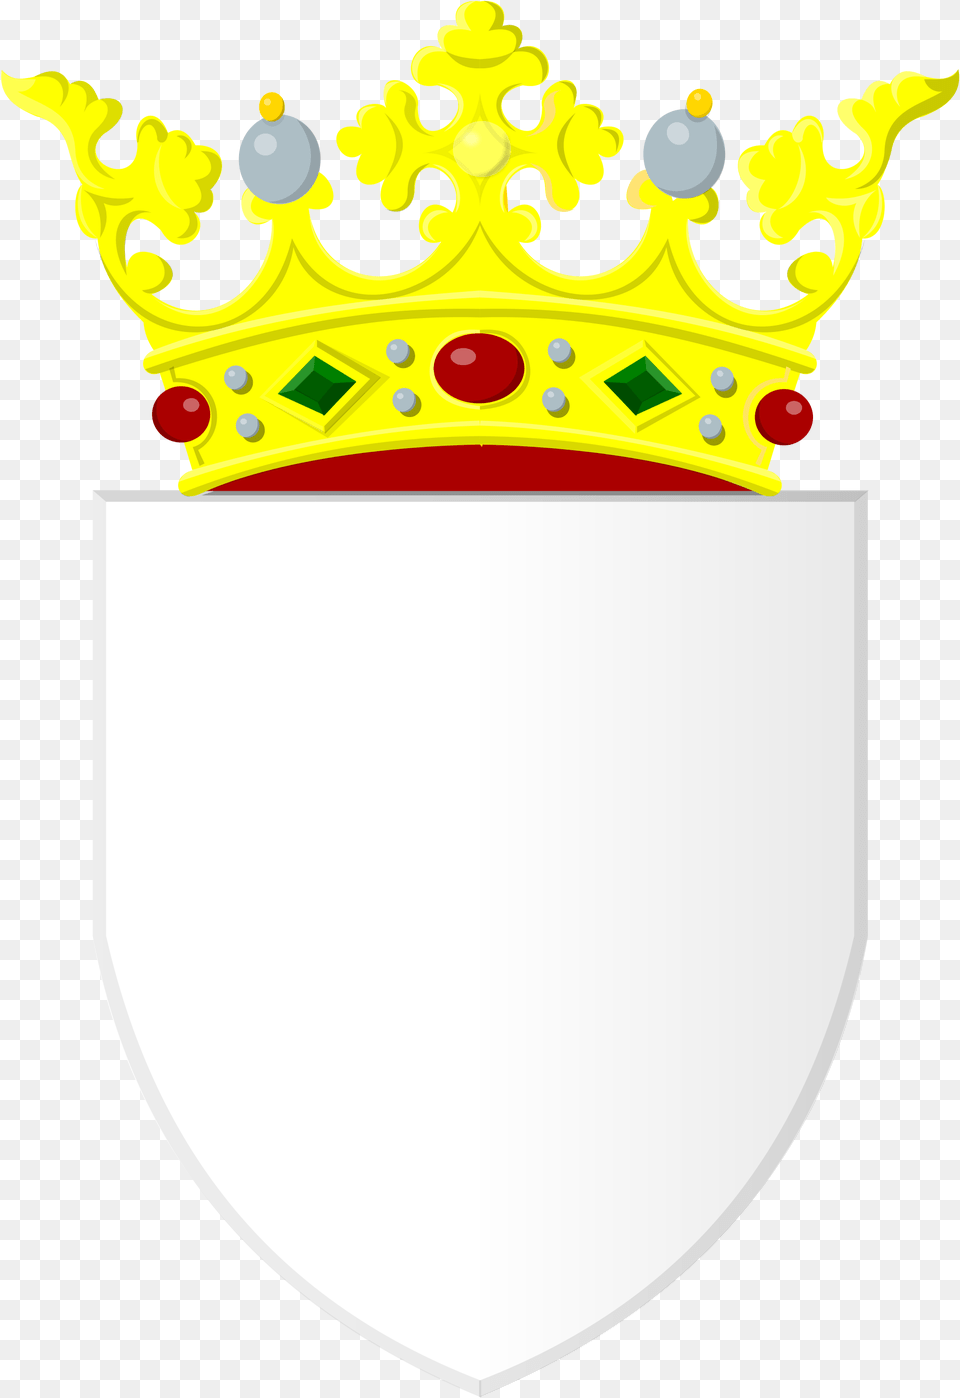 Silver Shield With Golden Crown, Accessories, Jewelry Free Png Download